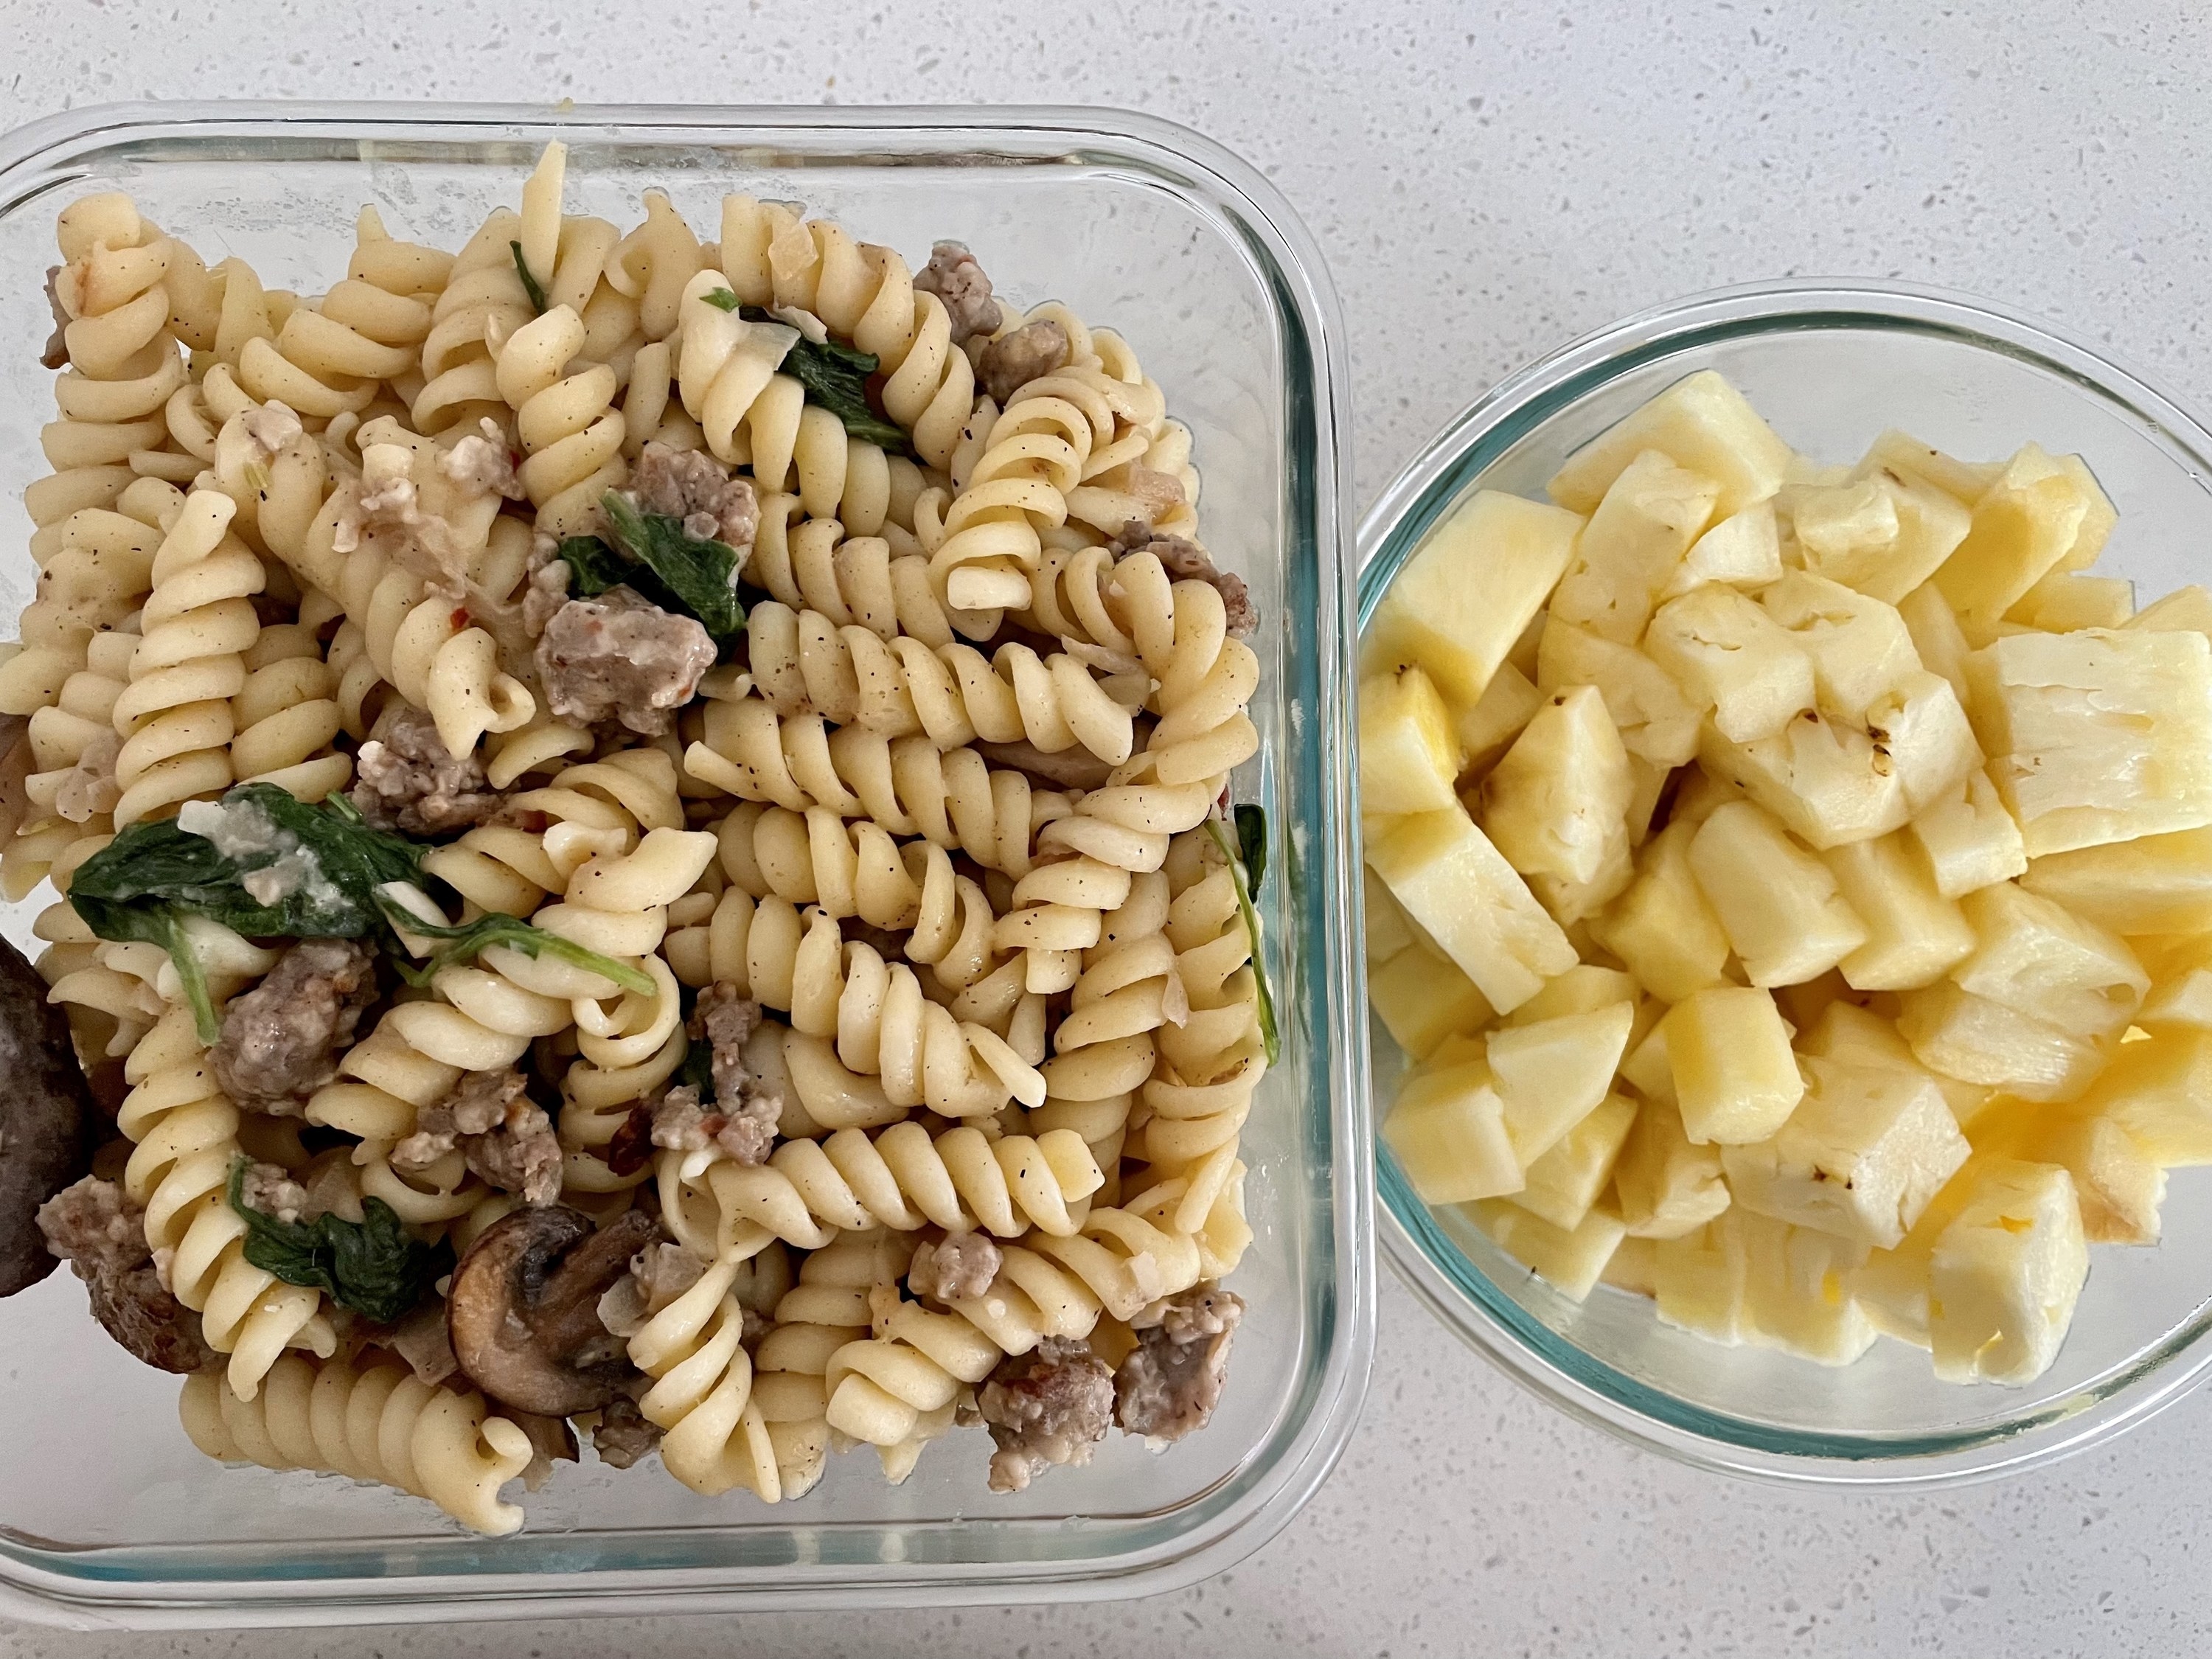 Leftover pasta and pineapple chunks